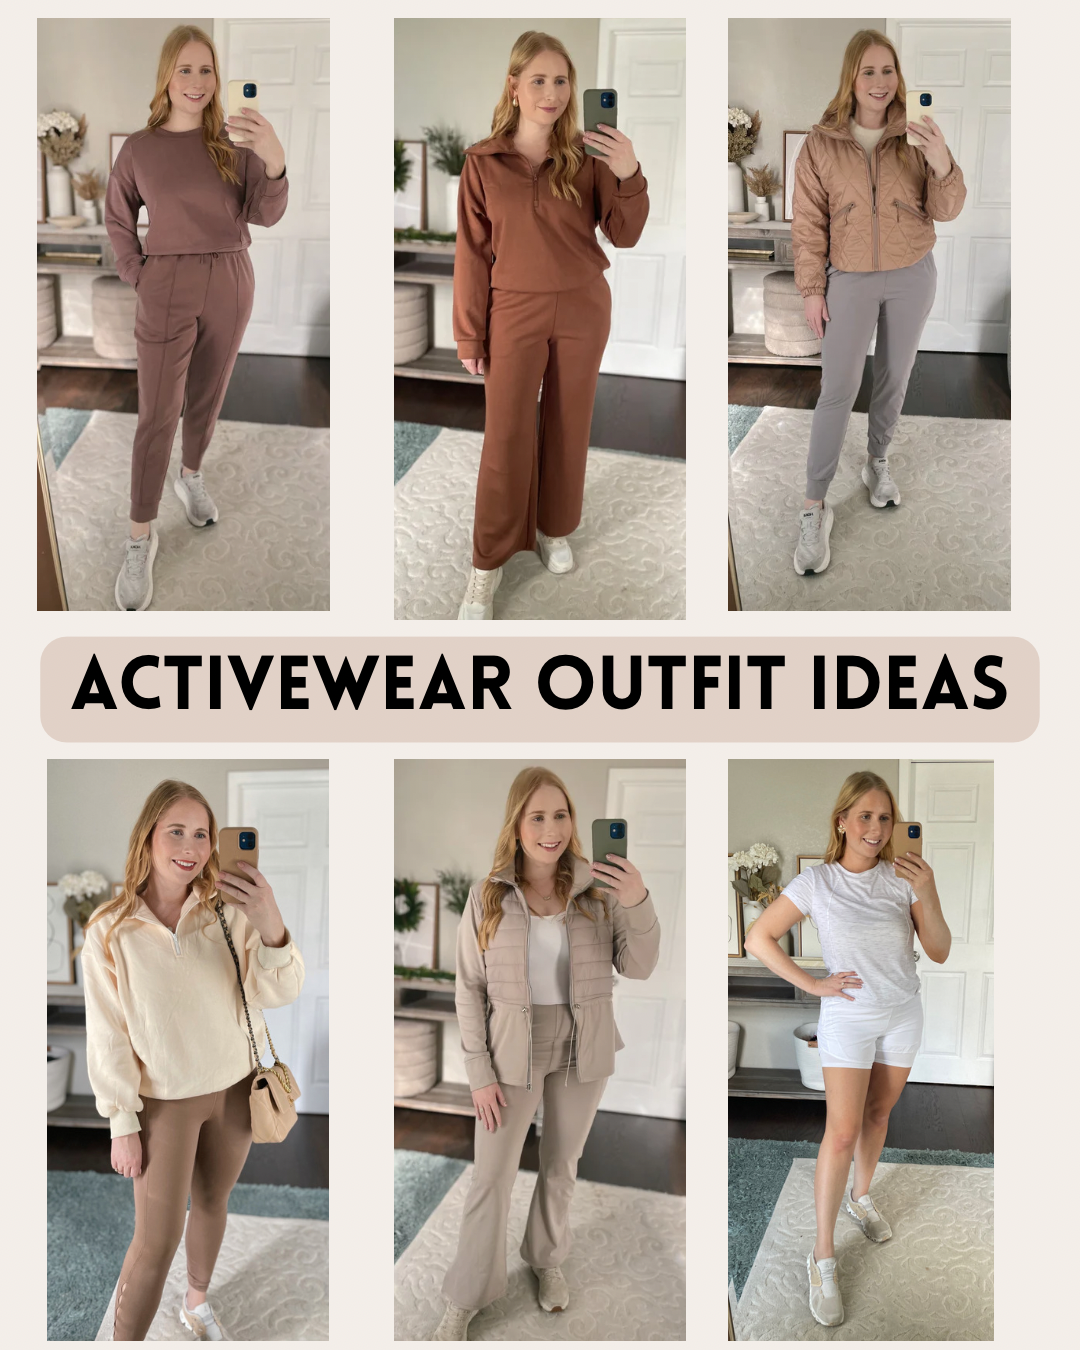 Activewear Outfit Ideas and The Best Activewear for Women